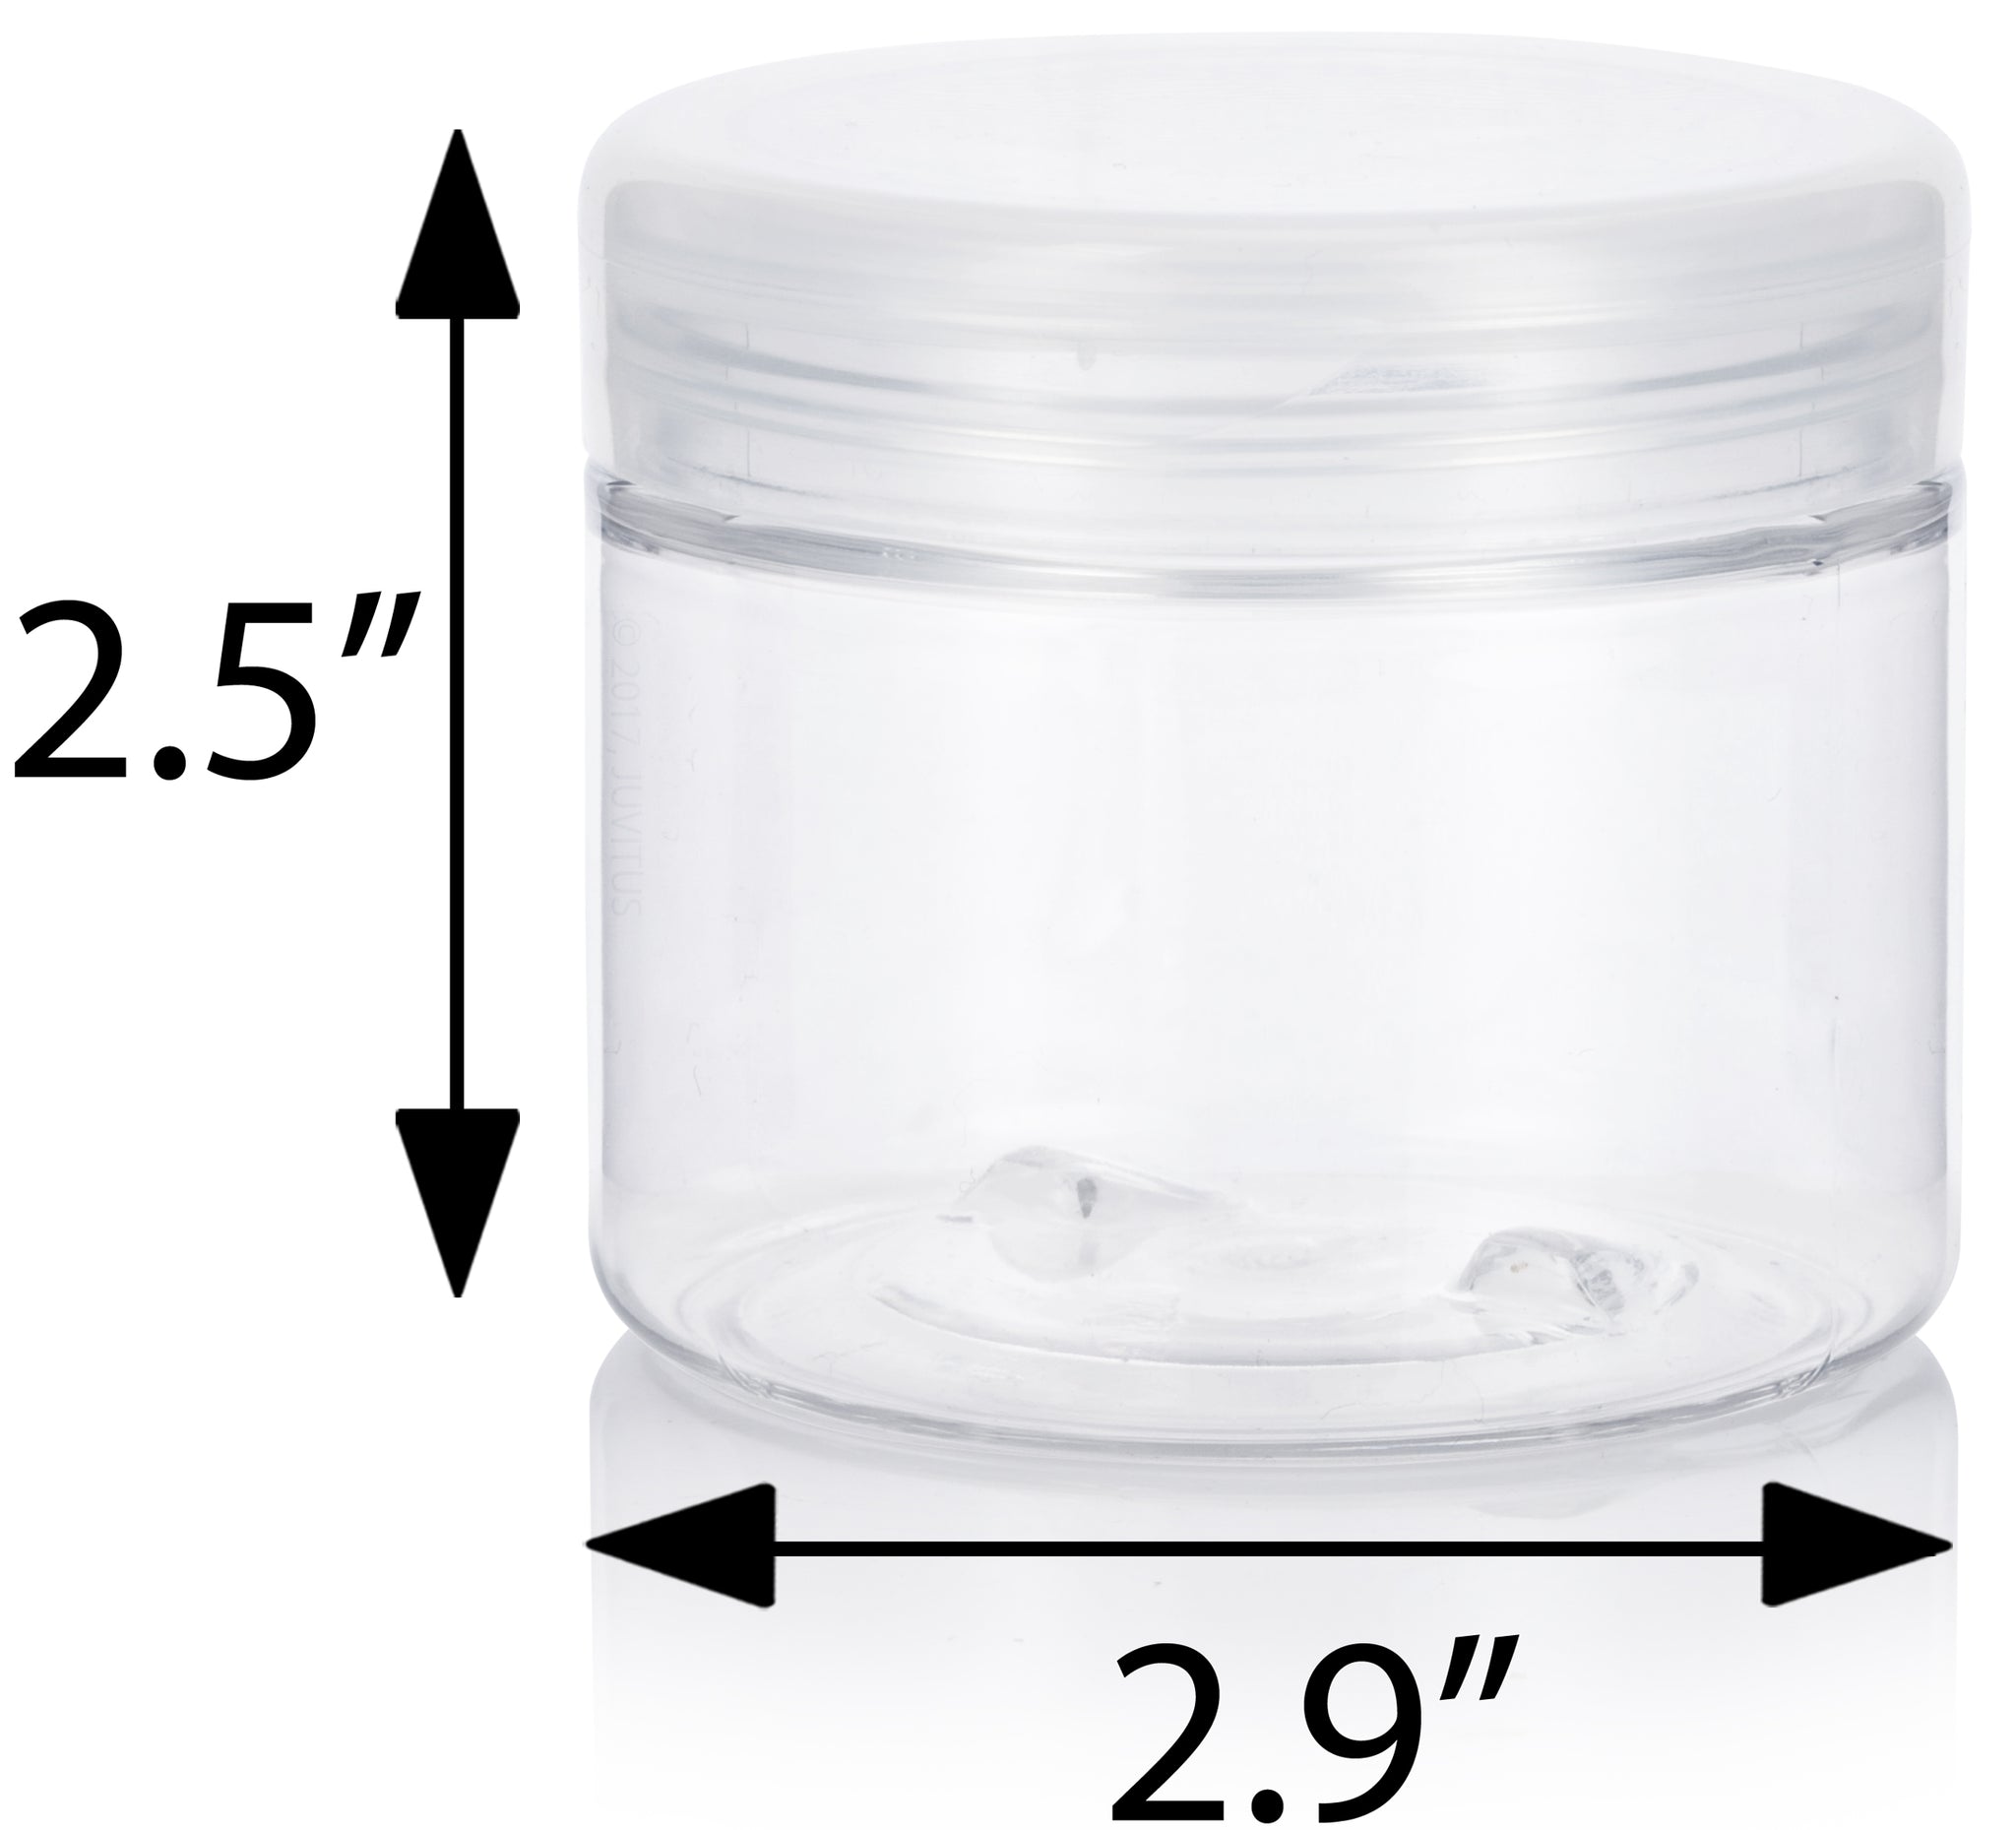 JUVITUS 2 oz Premium Borosilicate Clear Glass Jars with Bamboo Silicone Sealed Lid (12 Pack)